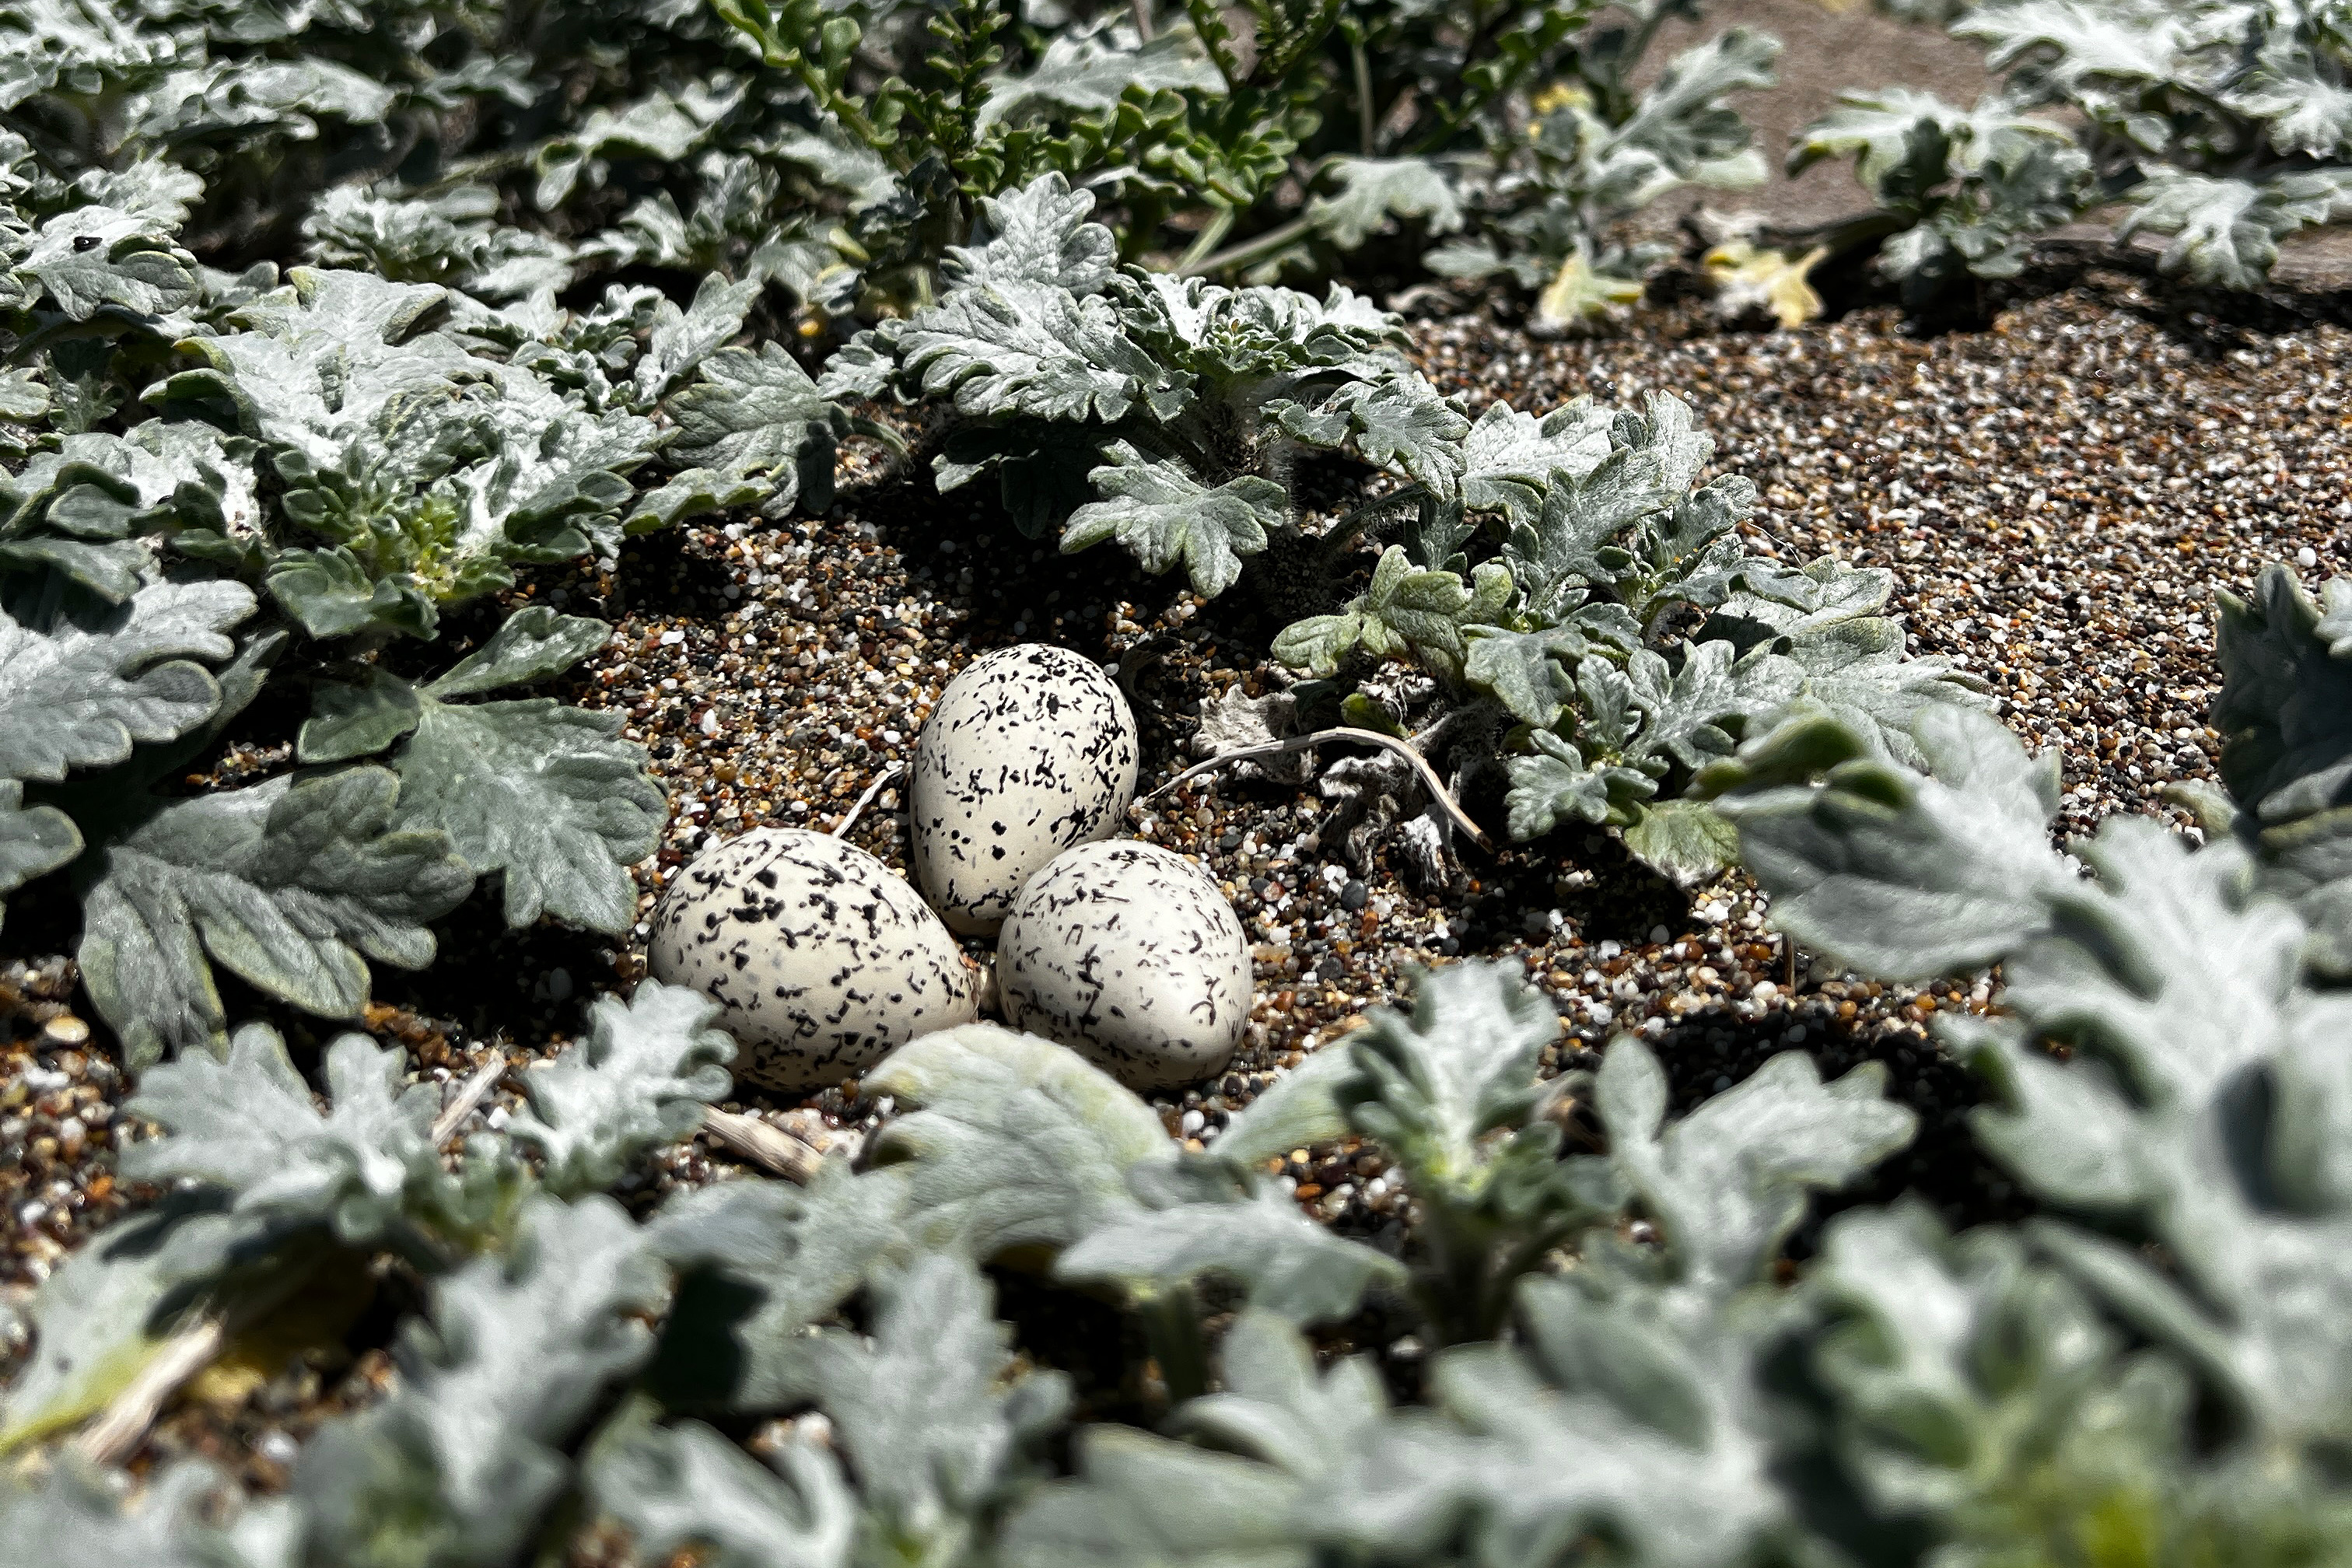 A photo of three small black-speckled, beige-colored egg sitting among leafy grayish-green vegetation.